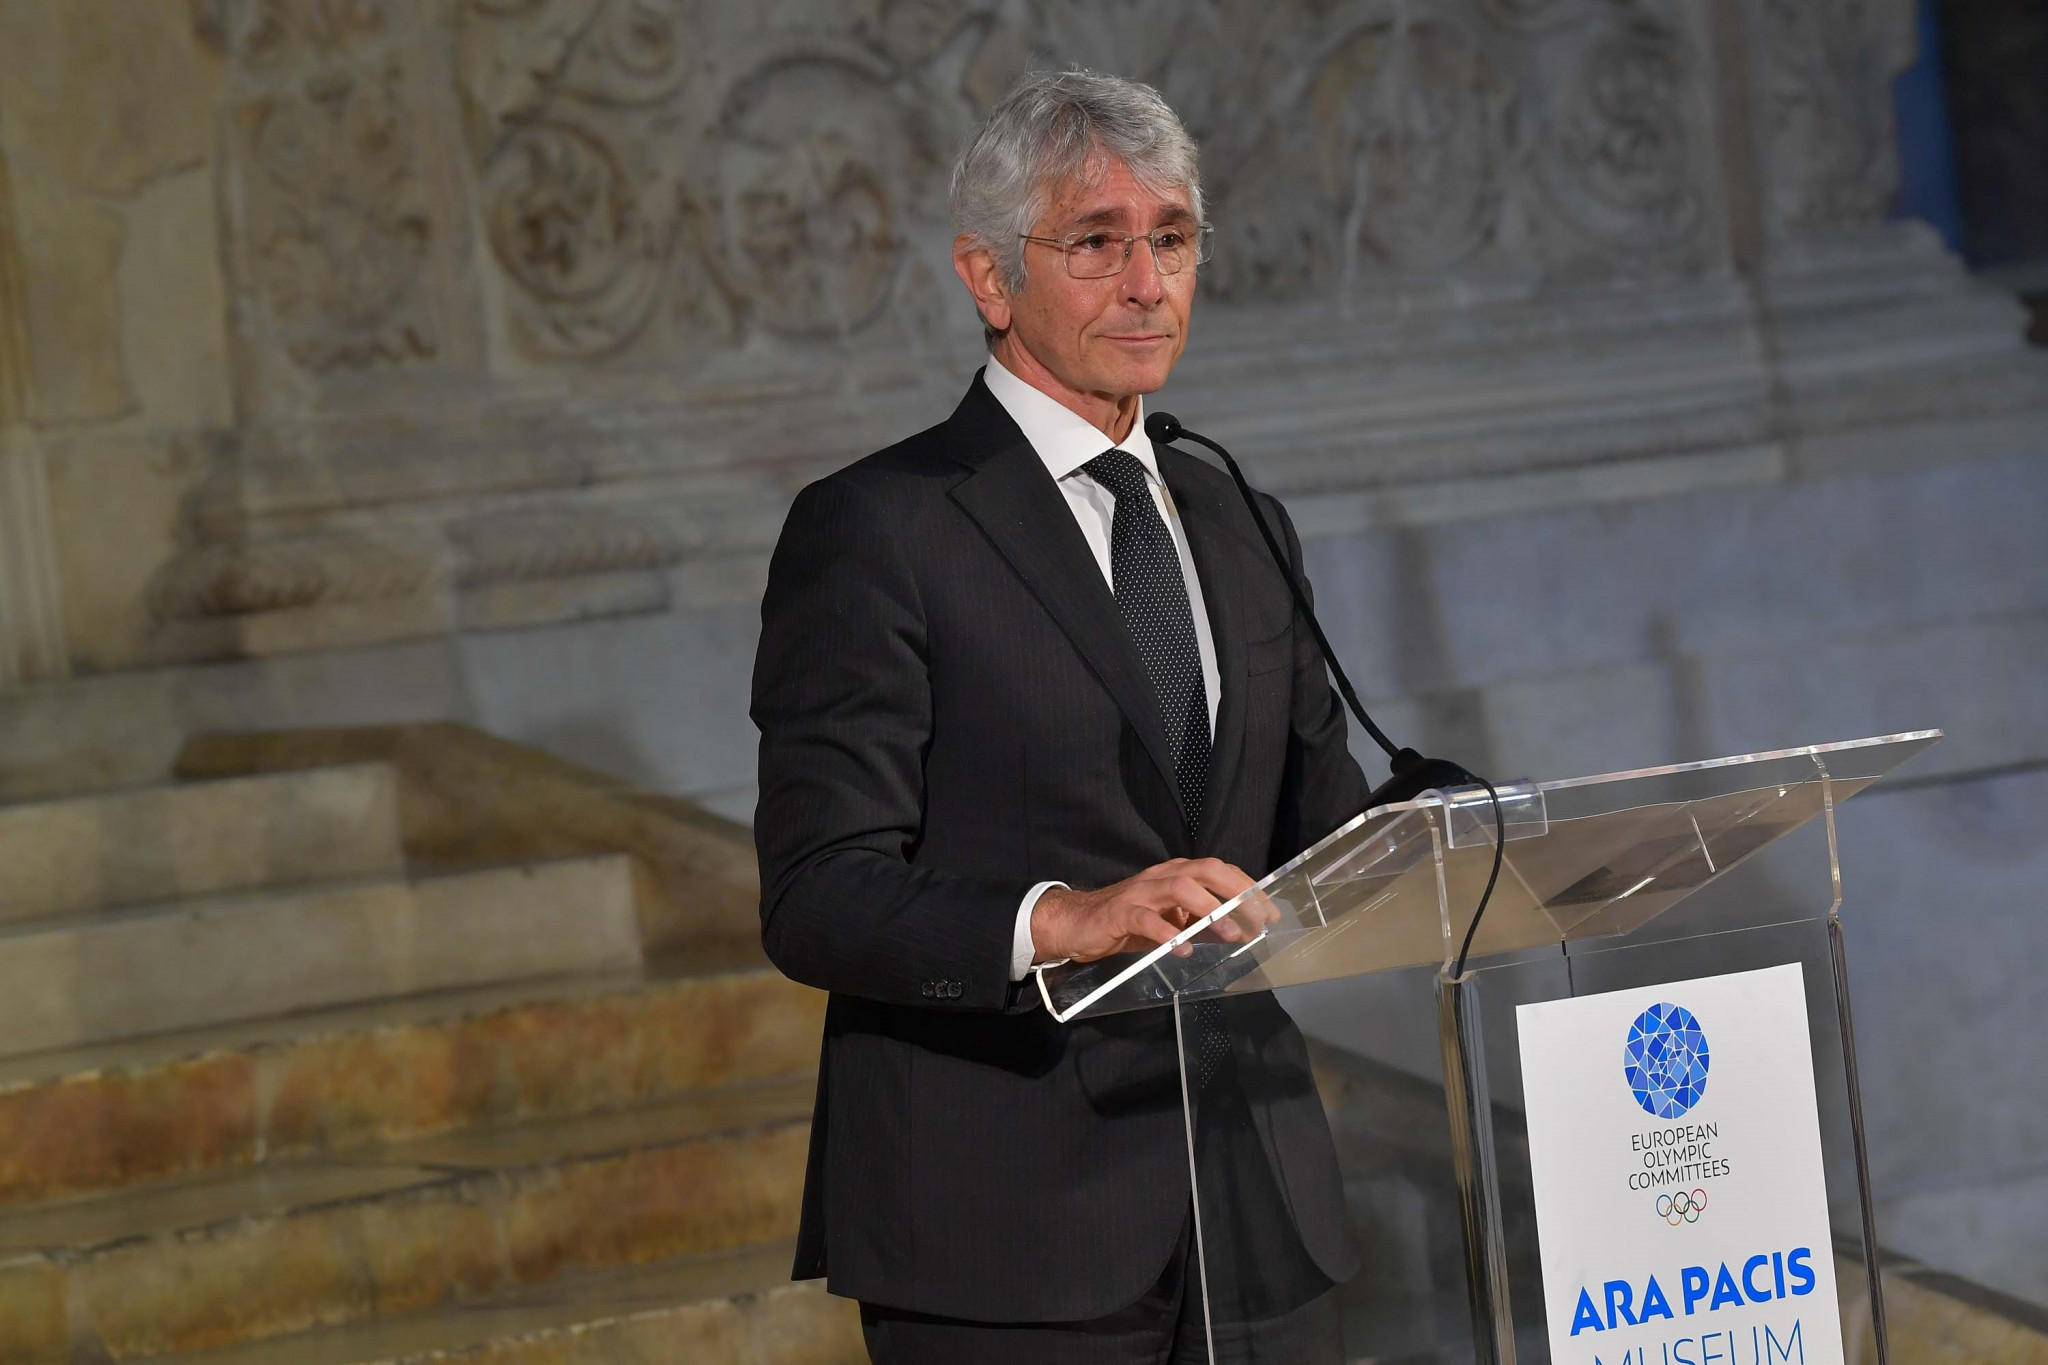 Italy's Sports Minister Andrea Abodi welcomed European Games officials to Rome for the handover ceremony ©EOC